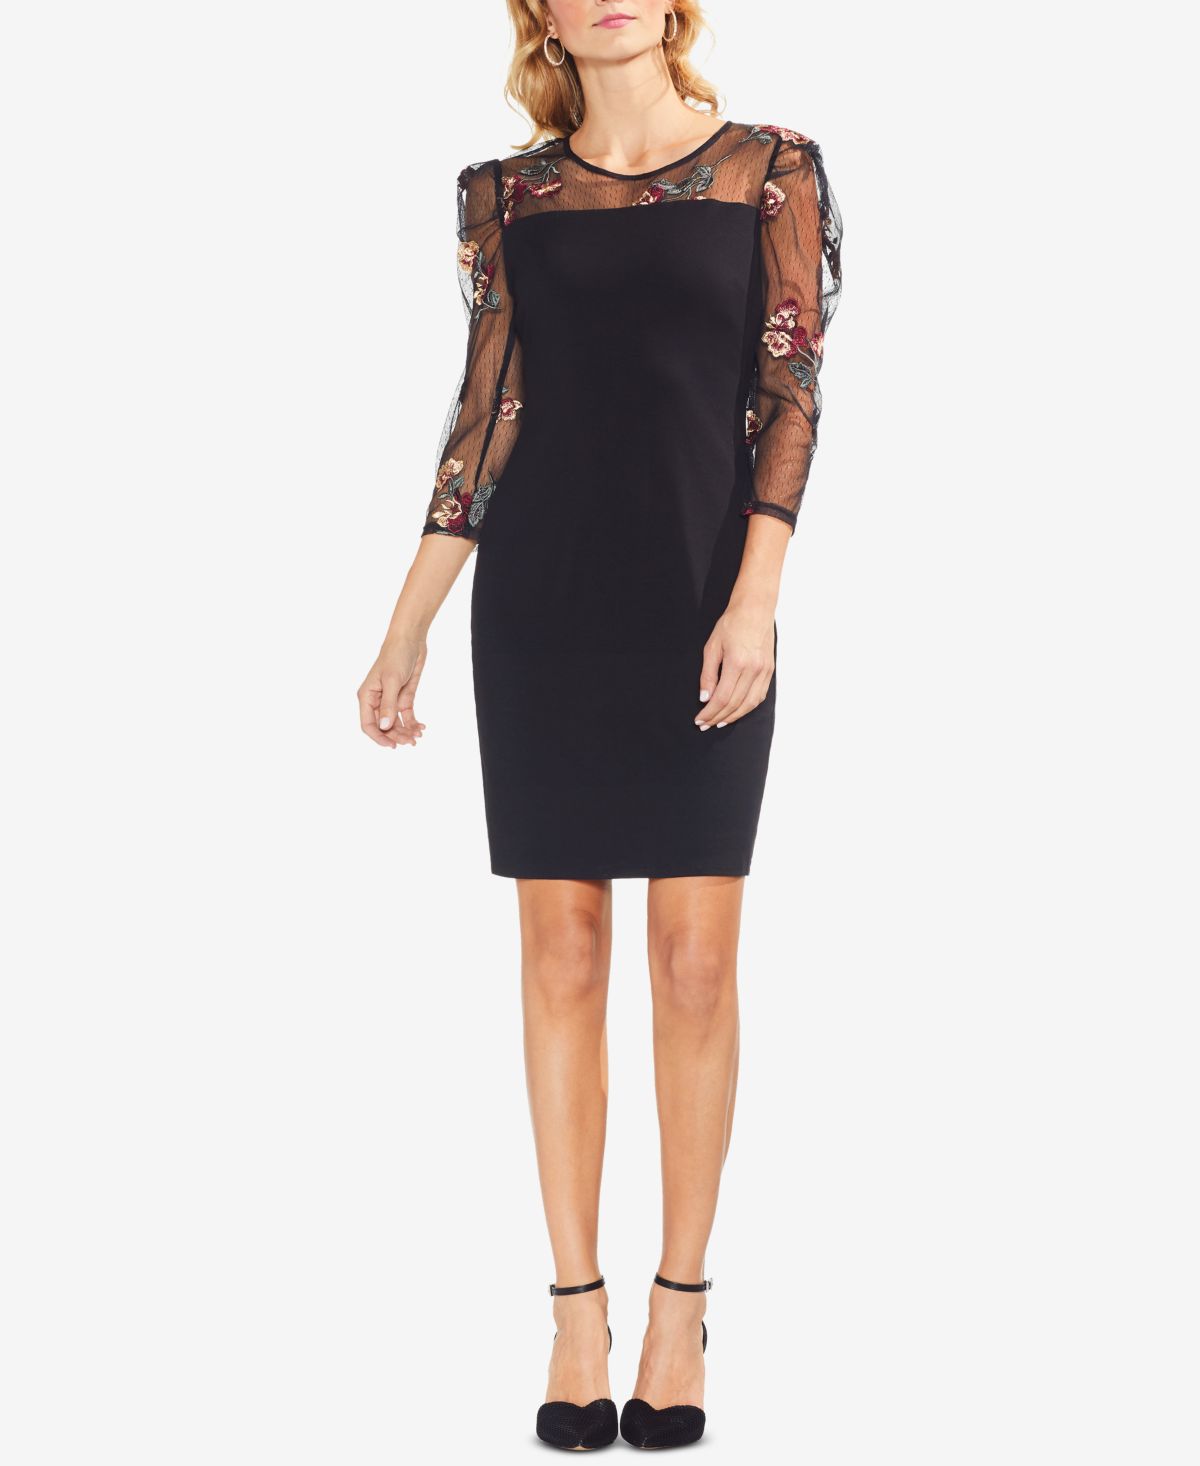 Vince Camuto Womens Embroidered Mesh-Sleeve Dress,Black,X-Small